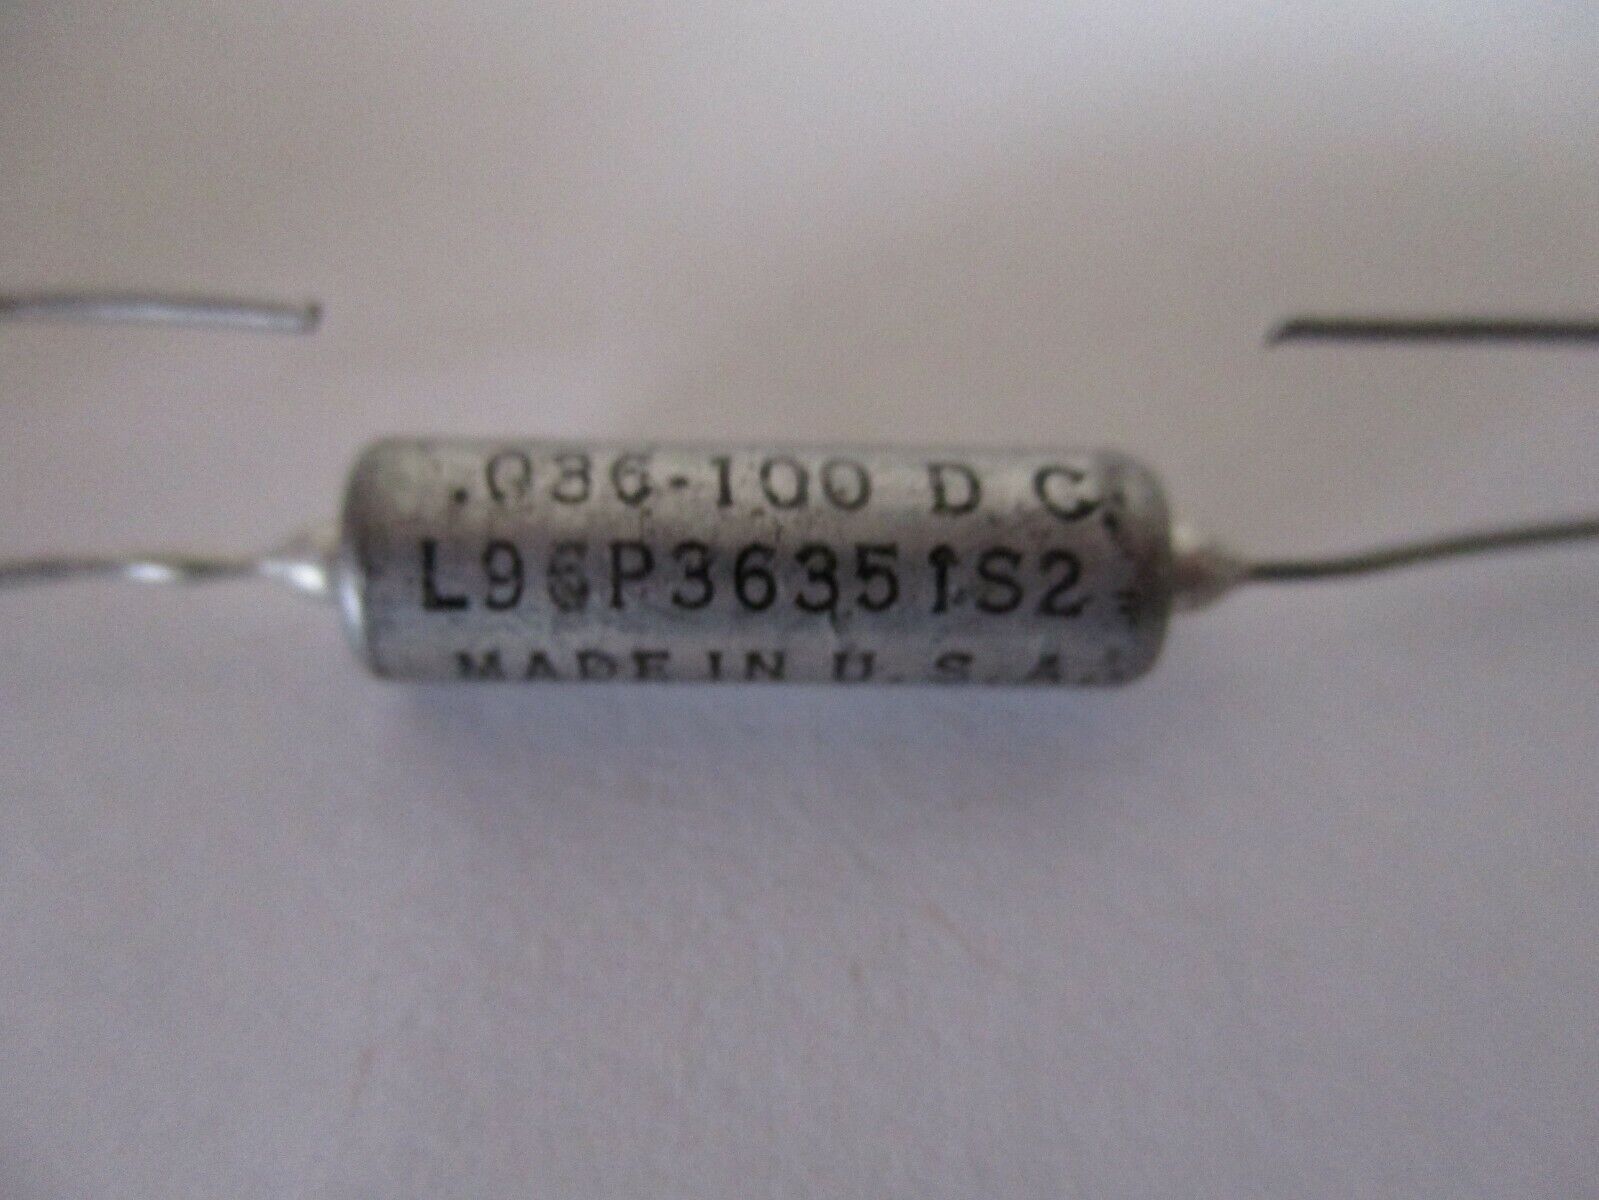 Spague L96P36351S2 Vitamin Q 0.36 100V Capacitor Paper Dielectric Fixed 